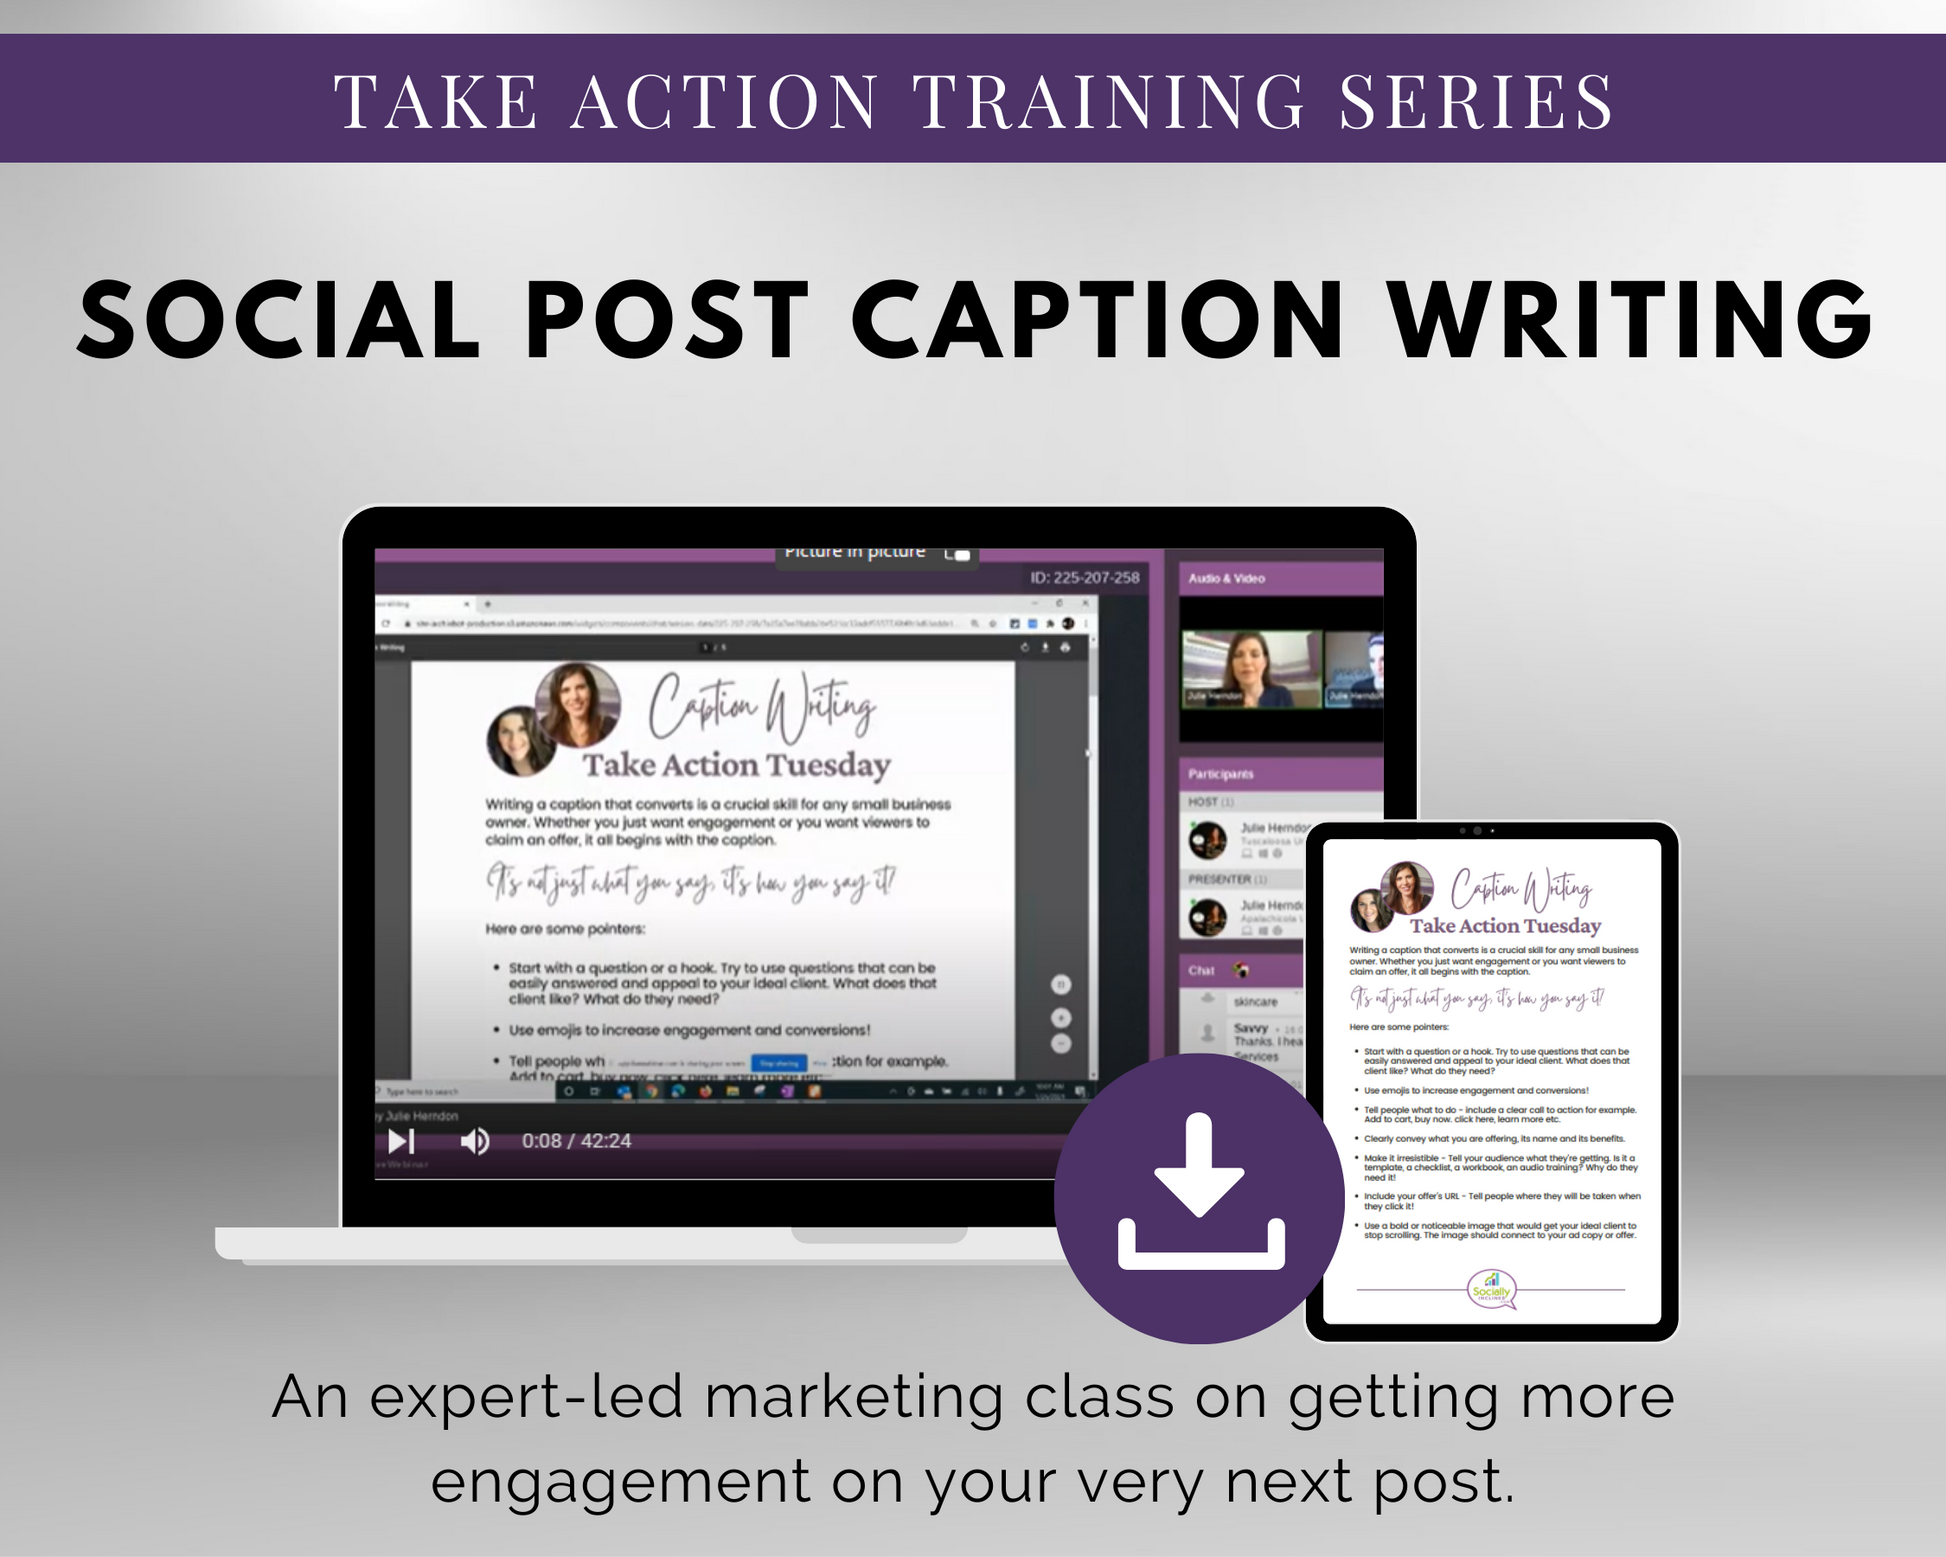 Take action training series social post caption writing for TAT - Social Post Caption Writing Masterclass by Get Socially Inclined.